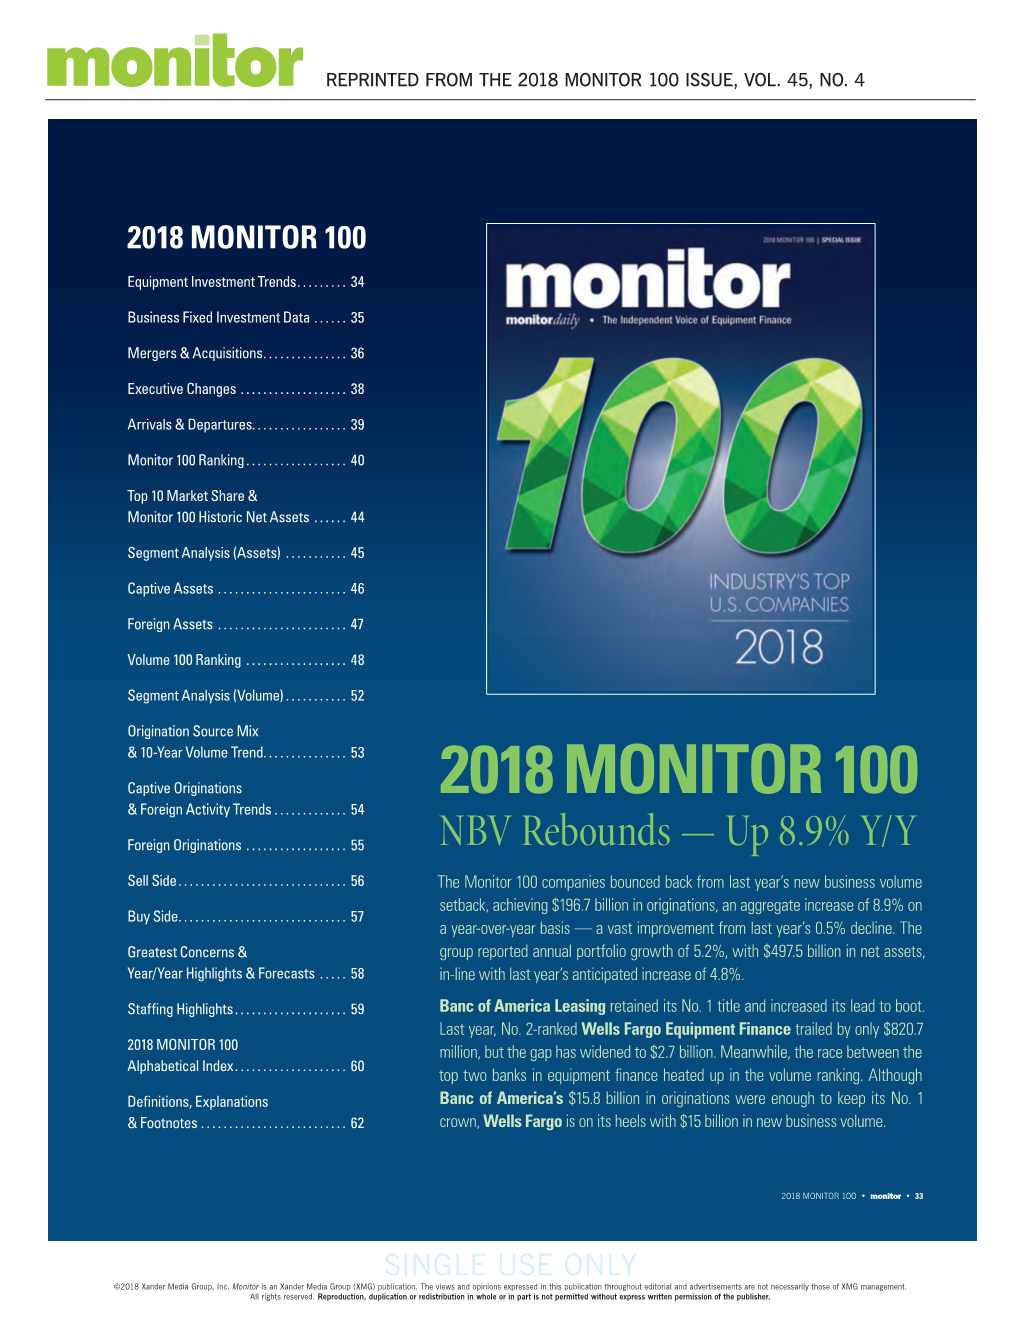 2018 Monitor 100 Issue, Vol